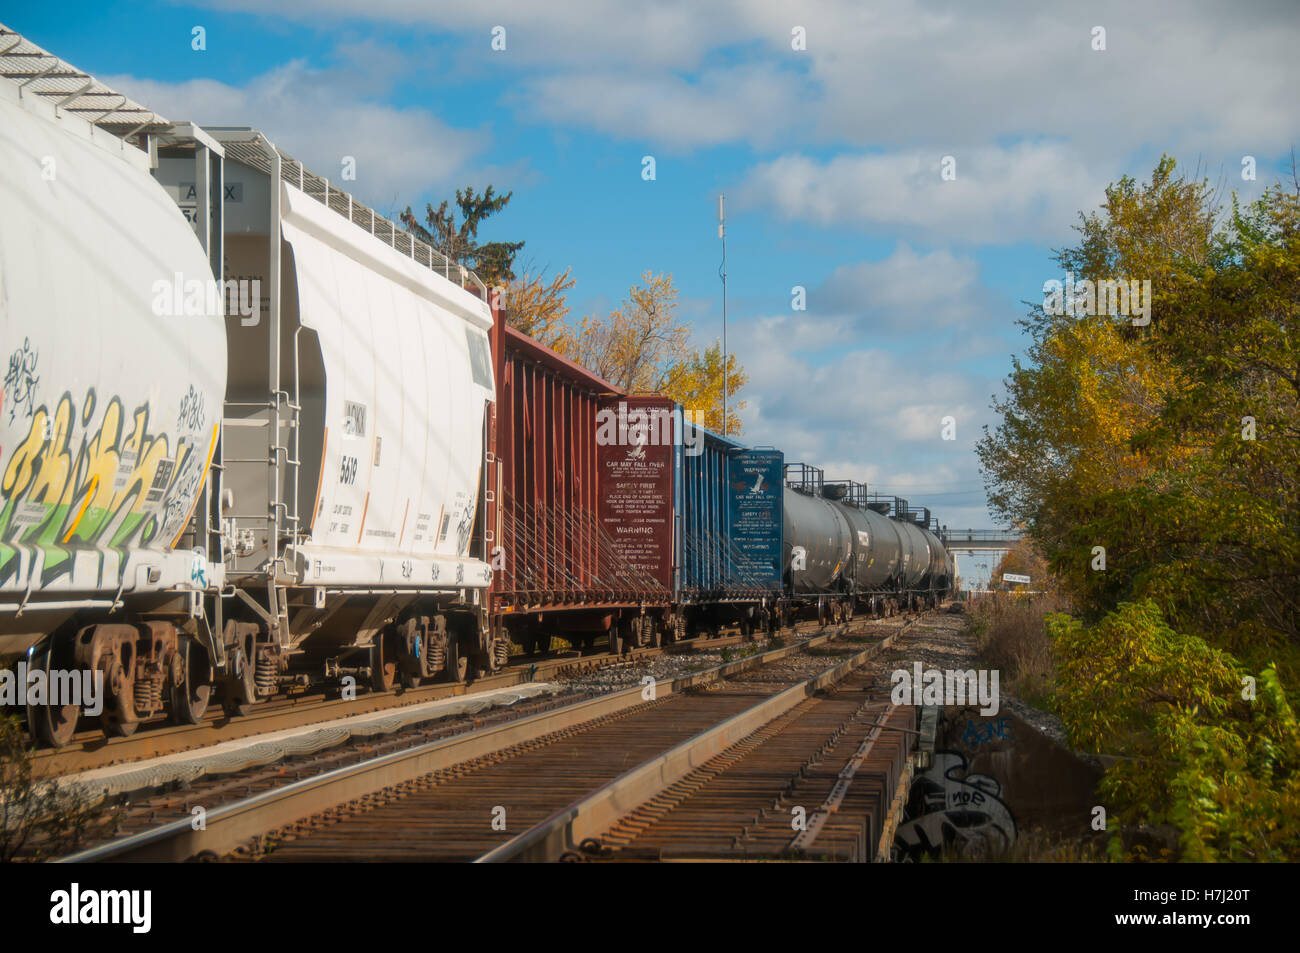 Freight train crossing an old wood bridge in autumn. Stock Photo